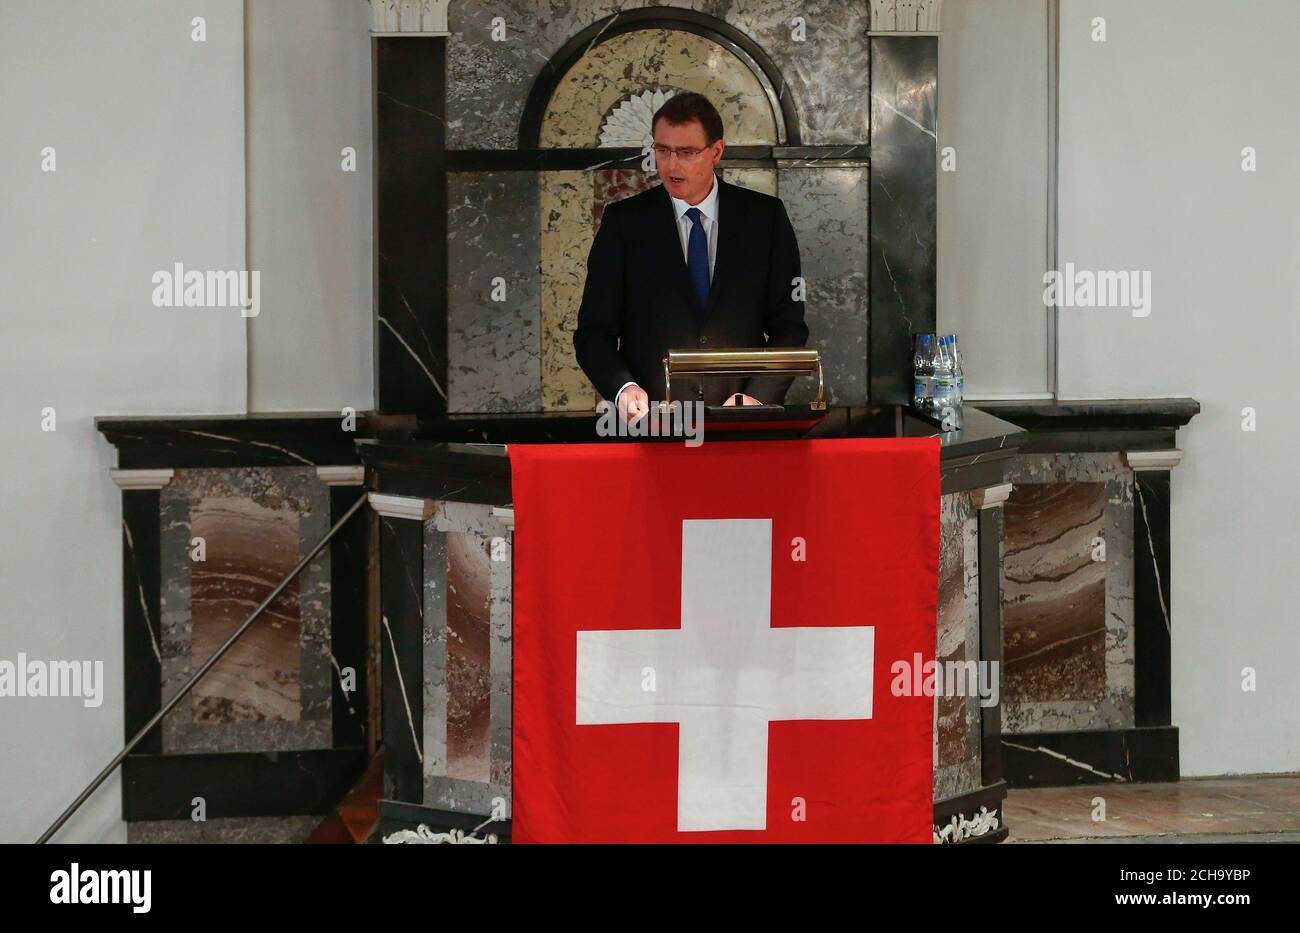 Thomas Jordan, chairman of the Swiss National Bank (SNB) delivers a public  speech at a church in the town of Uster, near Zurich November 23, 2014.  Jordan repeated its opposition to a